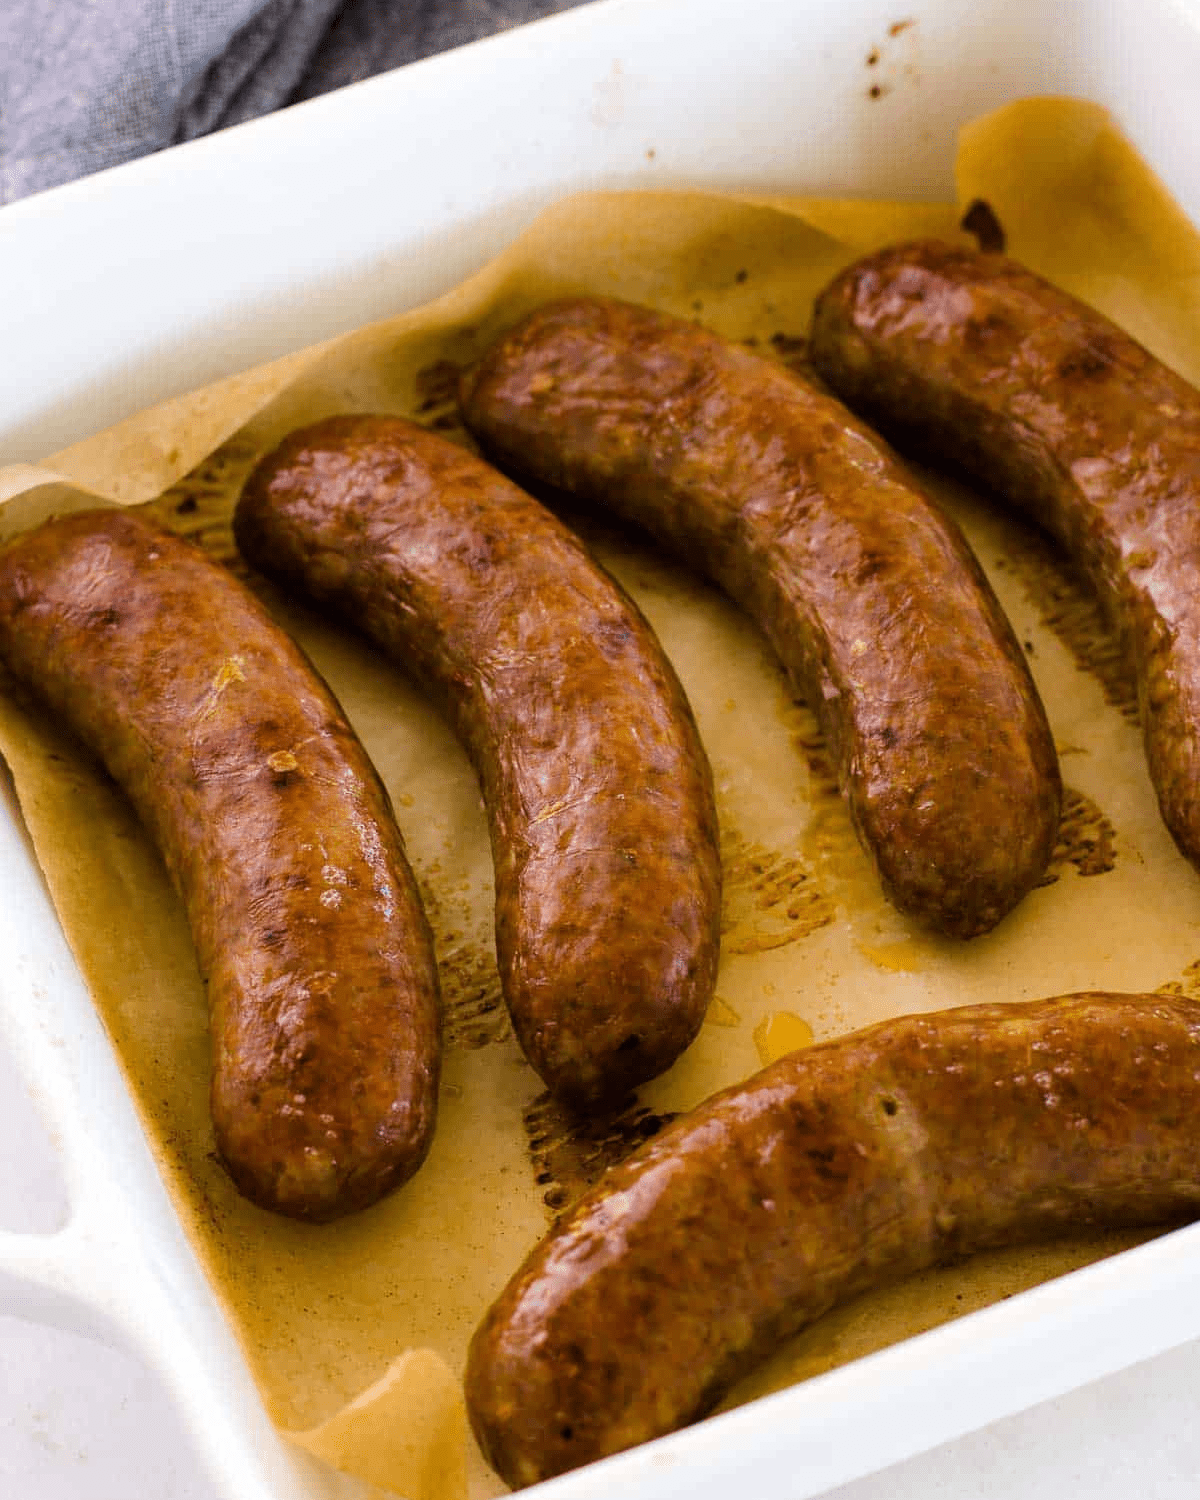 Sausages baked in a white oven dish